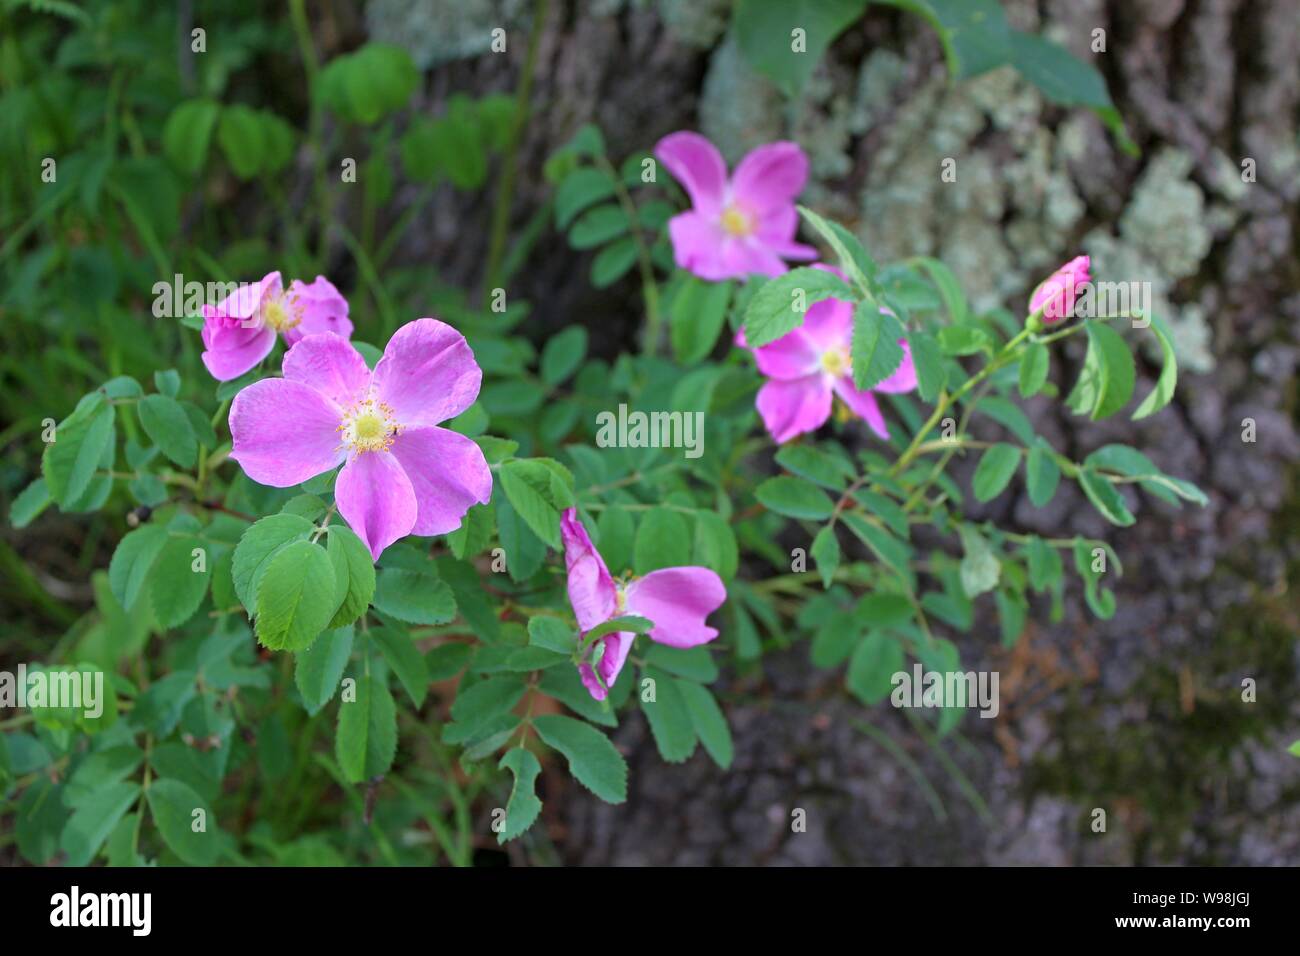 Wild Roses Blooming Next To A Tree Stock Photo